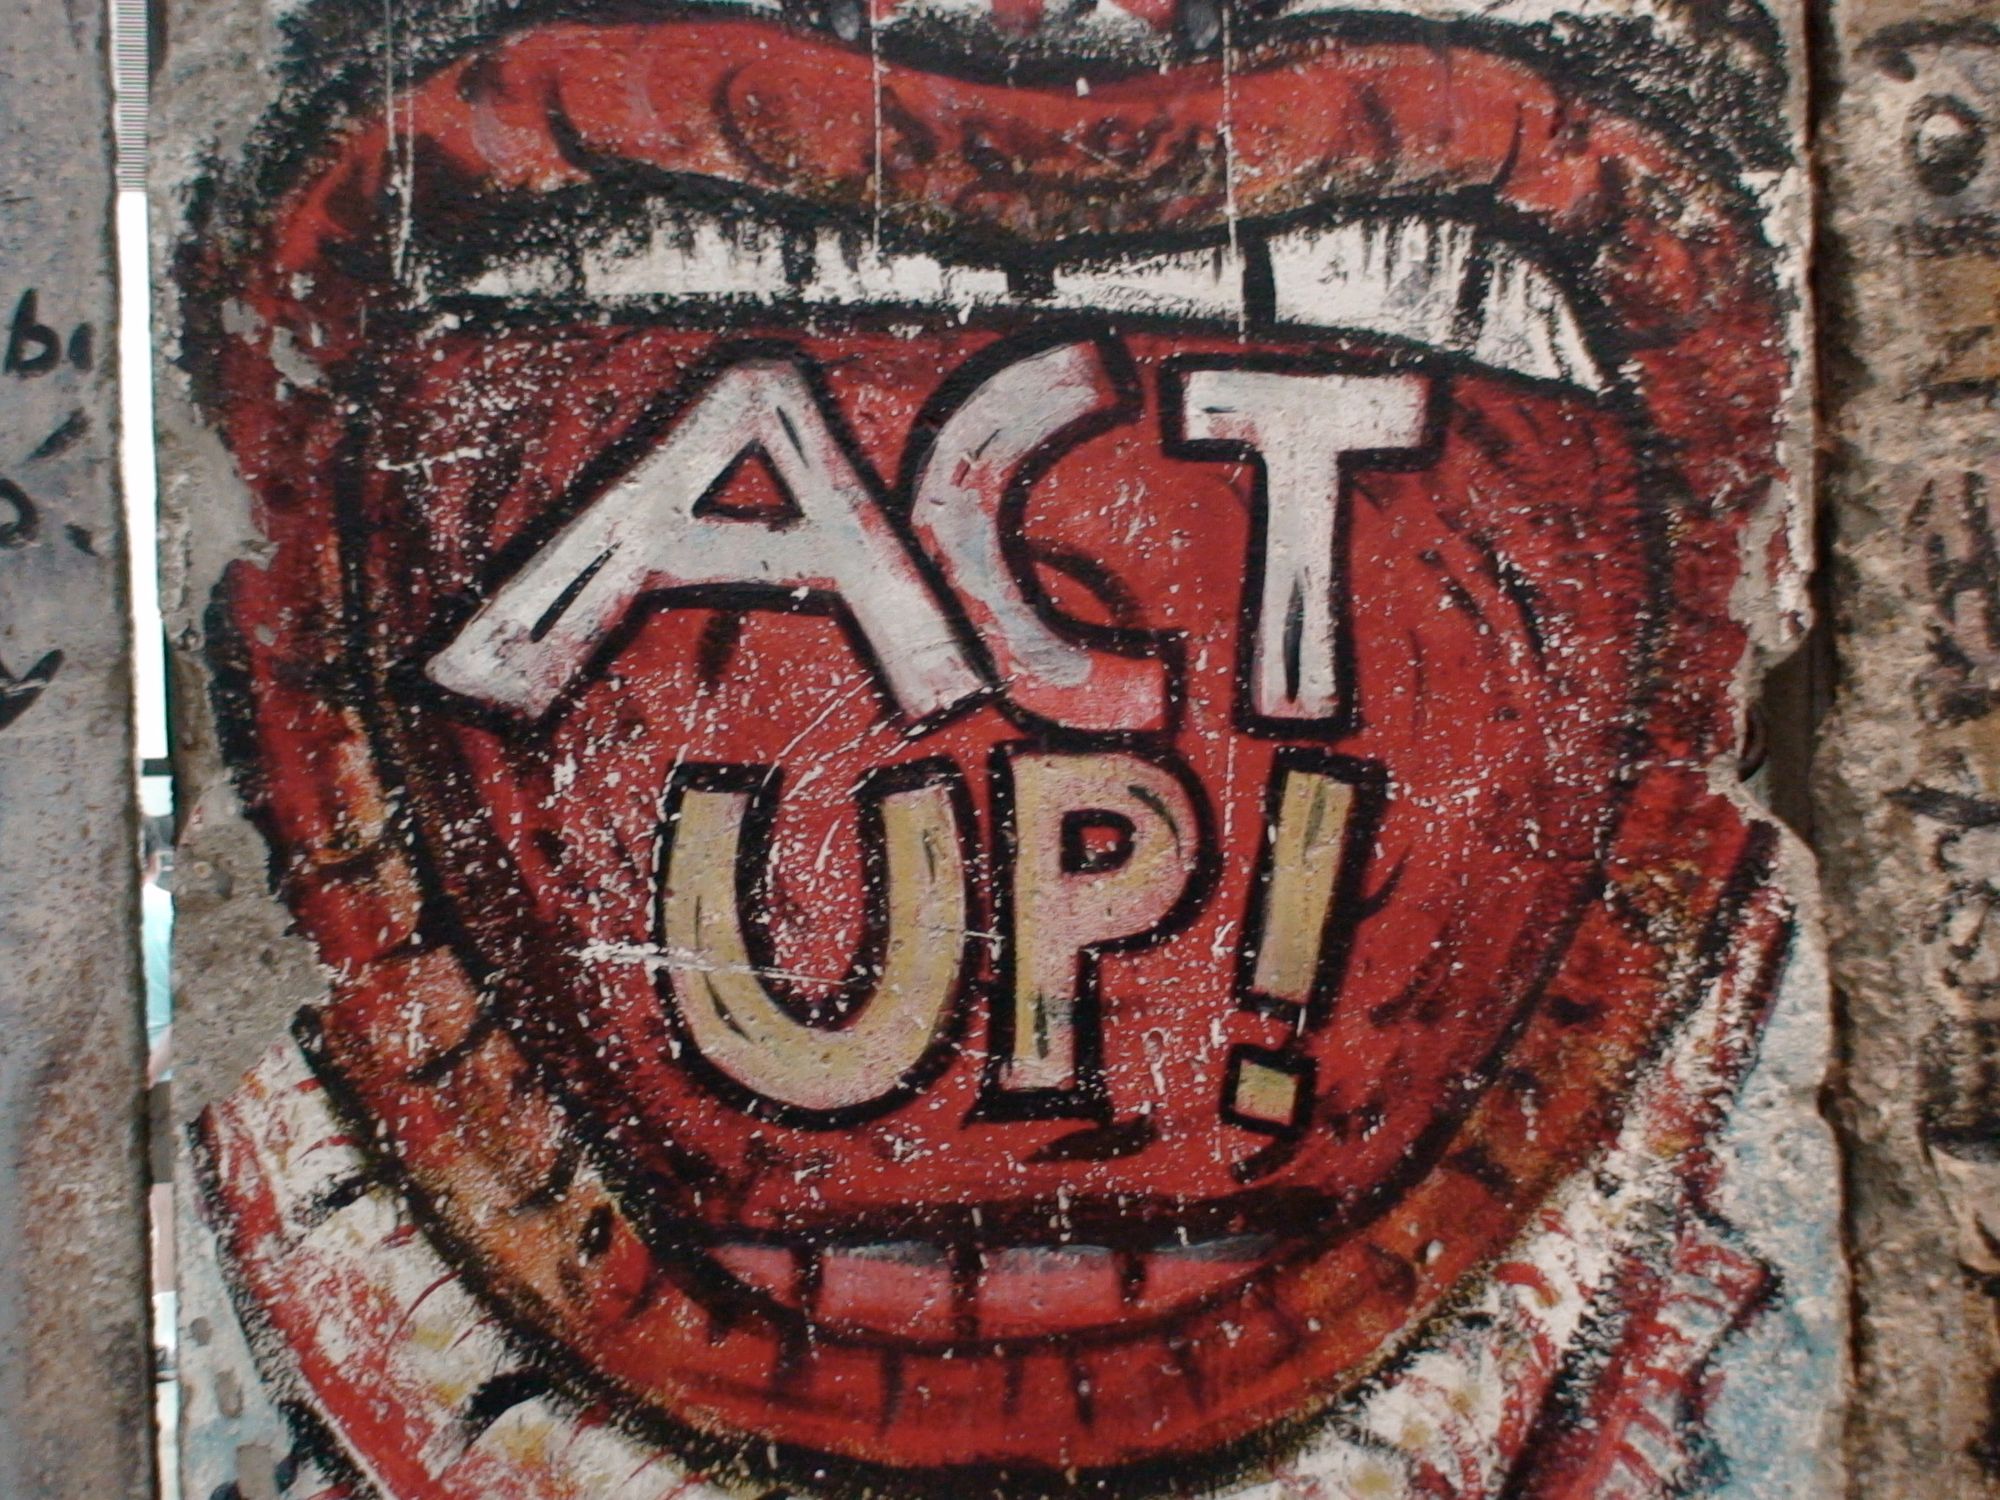 An image of graffiti depicting an open mouth with text inside saying "ACT UP".